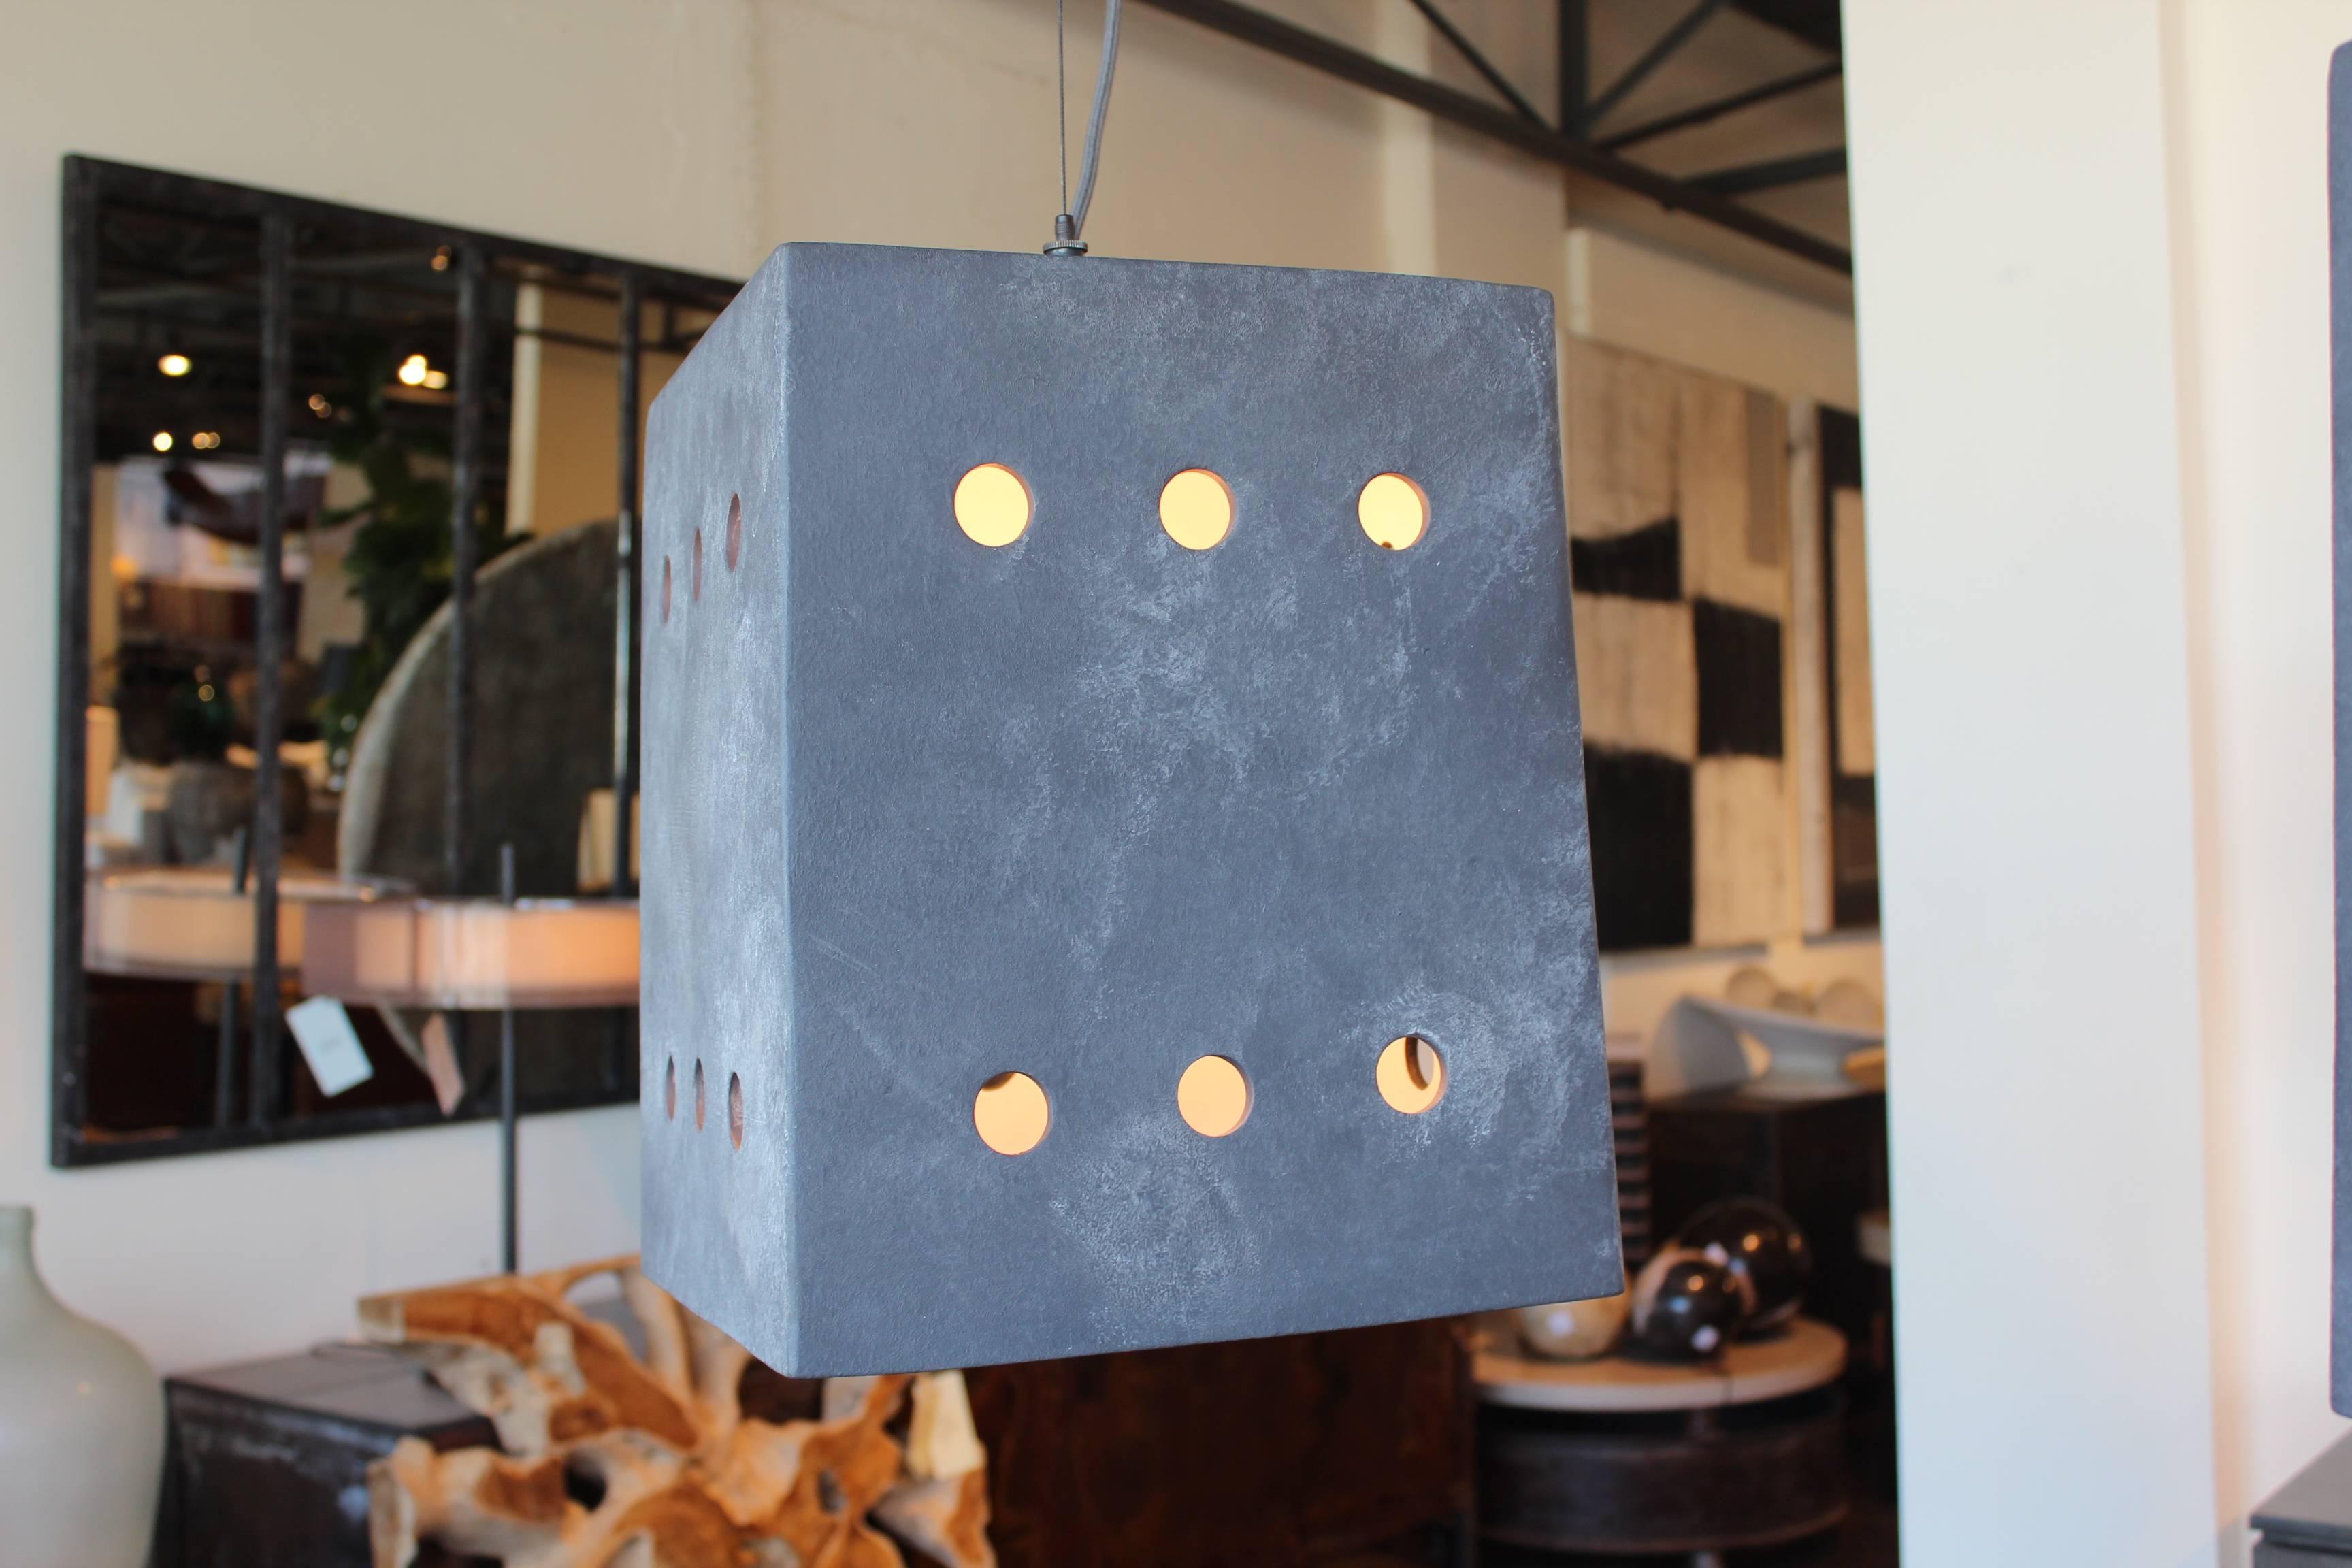 Artisan square porcelain pendant light with circle cut-outs. Designed by Brendan Bass, Made in Italy. Matte charcoal finish.


Brendan Bass Custom -  Item can be reproduced